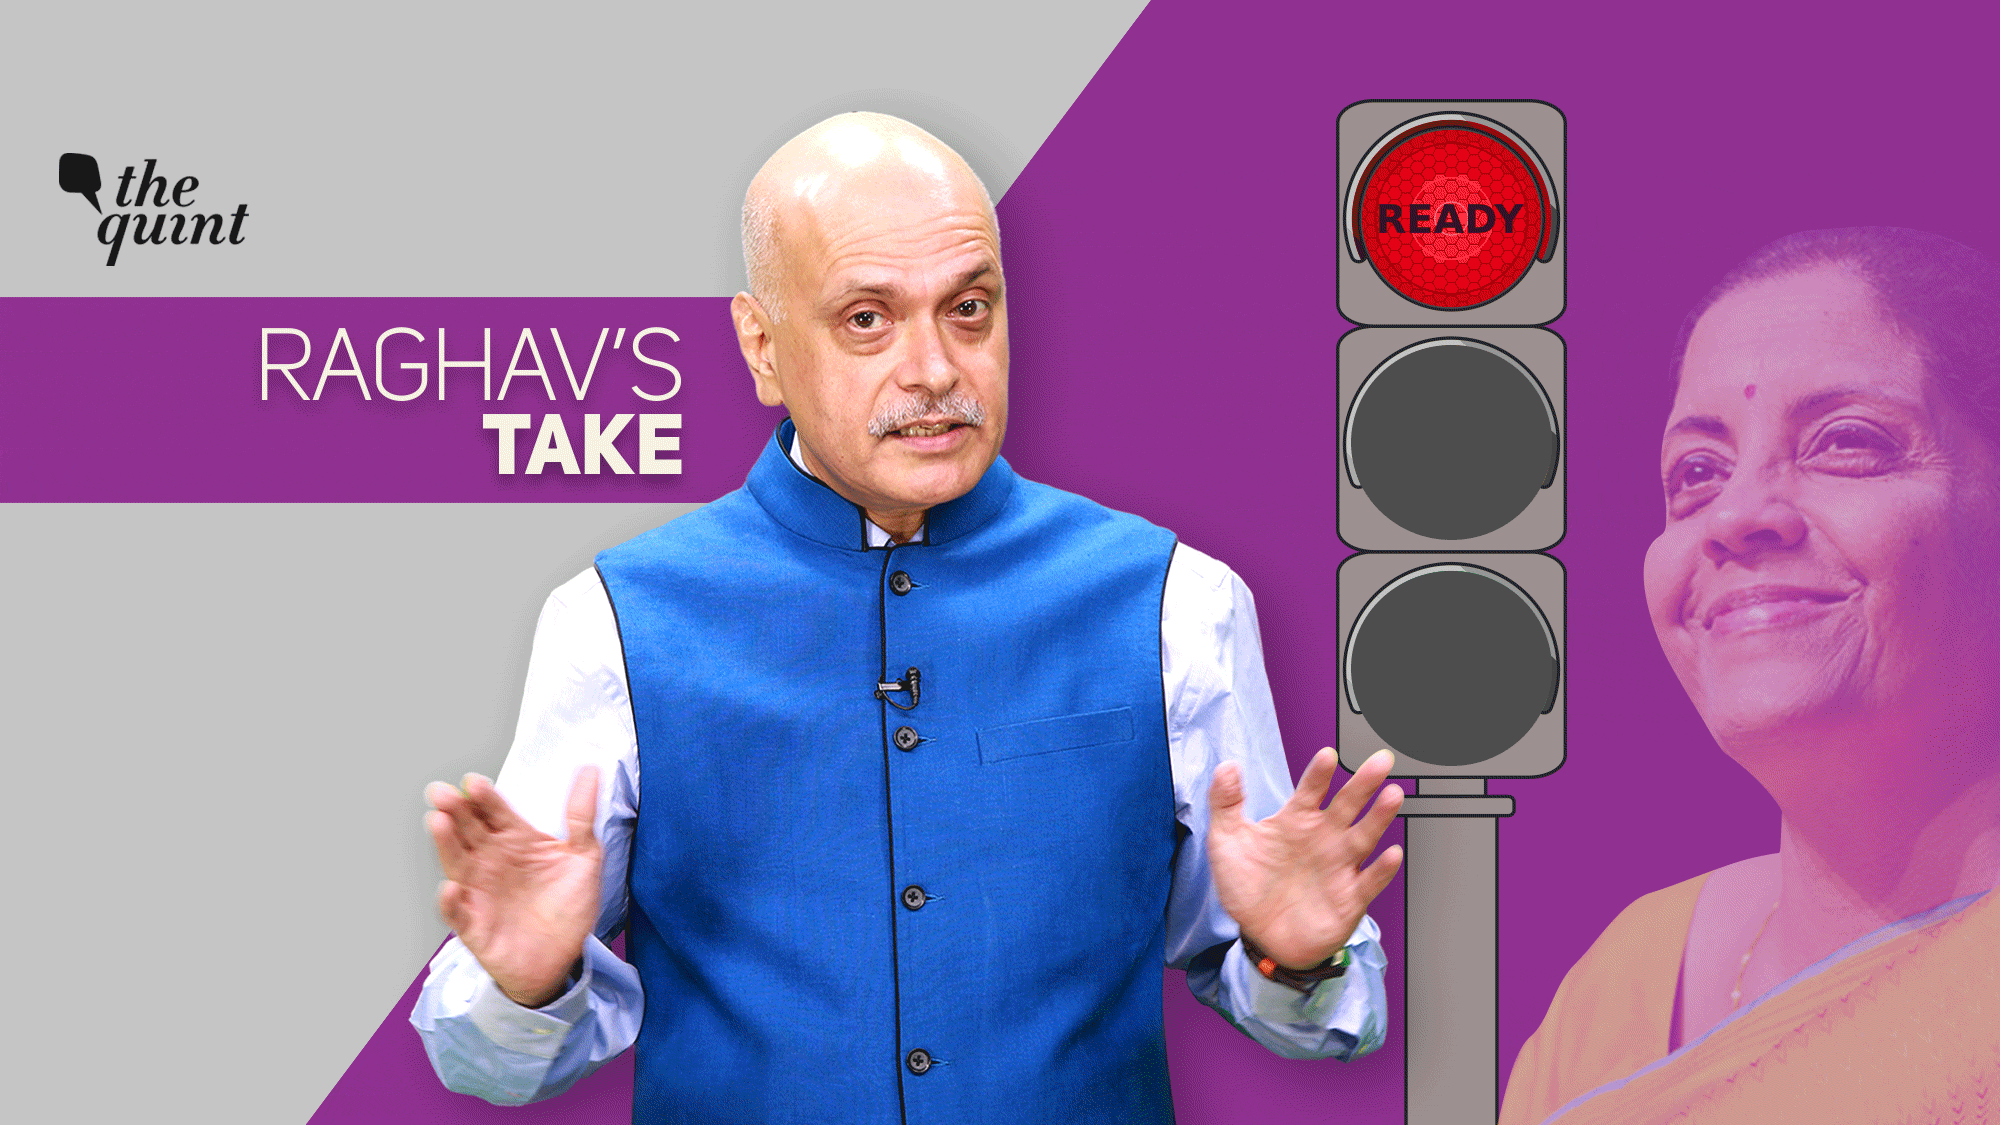 Image of The Quint’s Co-Founder &amp; Editor Raghav Bahl, and Finance Minister Nirmala Sitharaman (R) used for representational purposes.